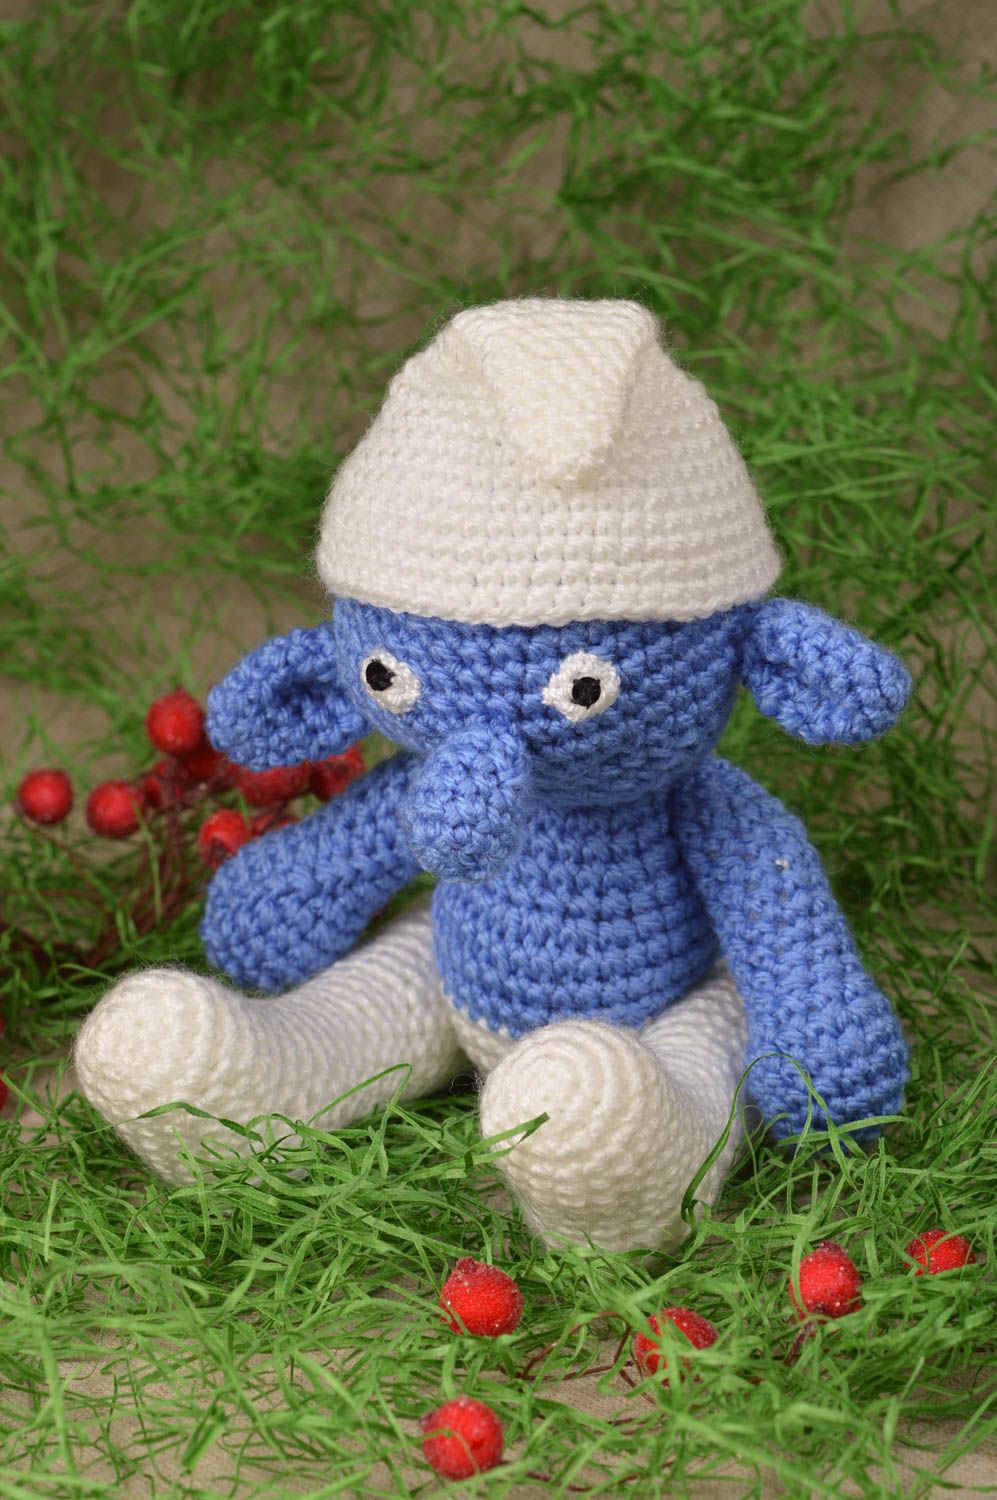 Handmade toy crocheted toy designer toy soft toy unusual gift for baby photo 1